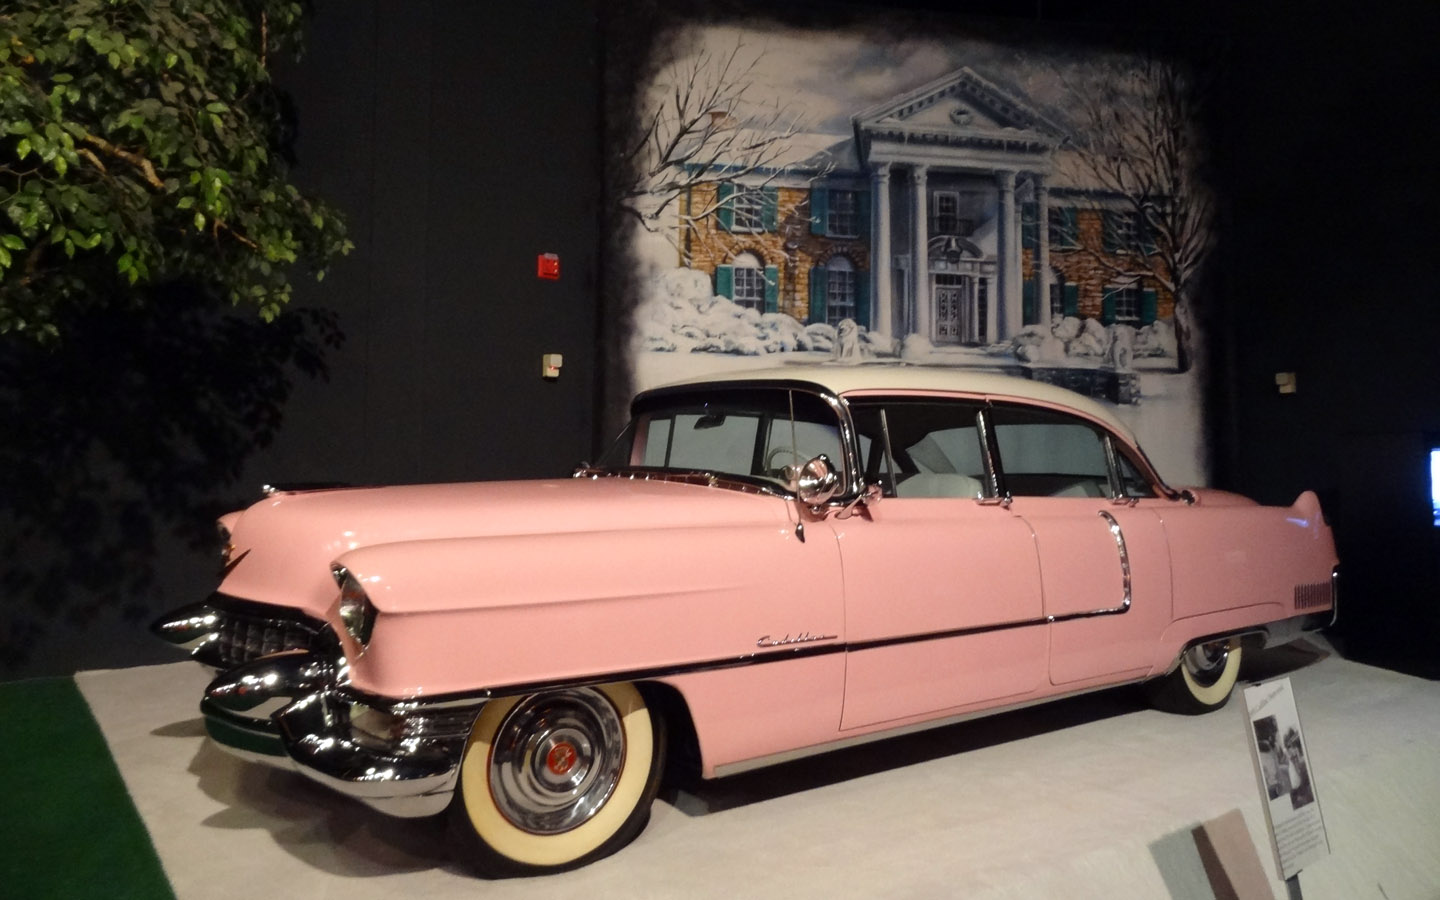 Elvis Presley's Pink Cadillac in Graceland, Memphis, Tennessee USA 2014